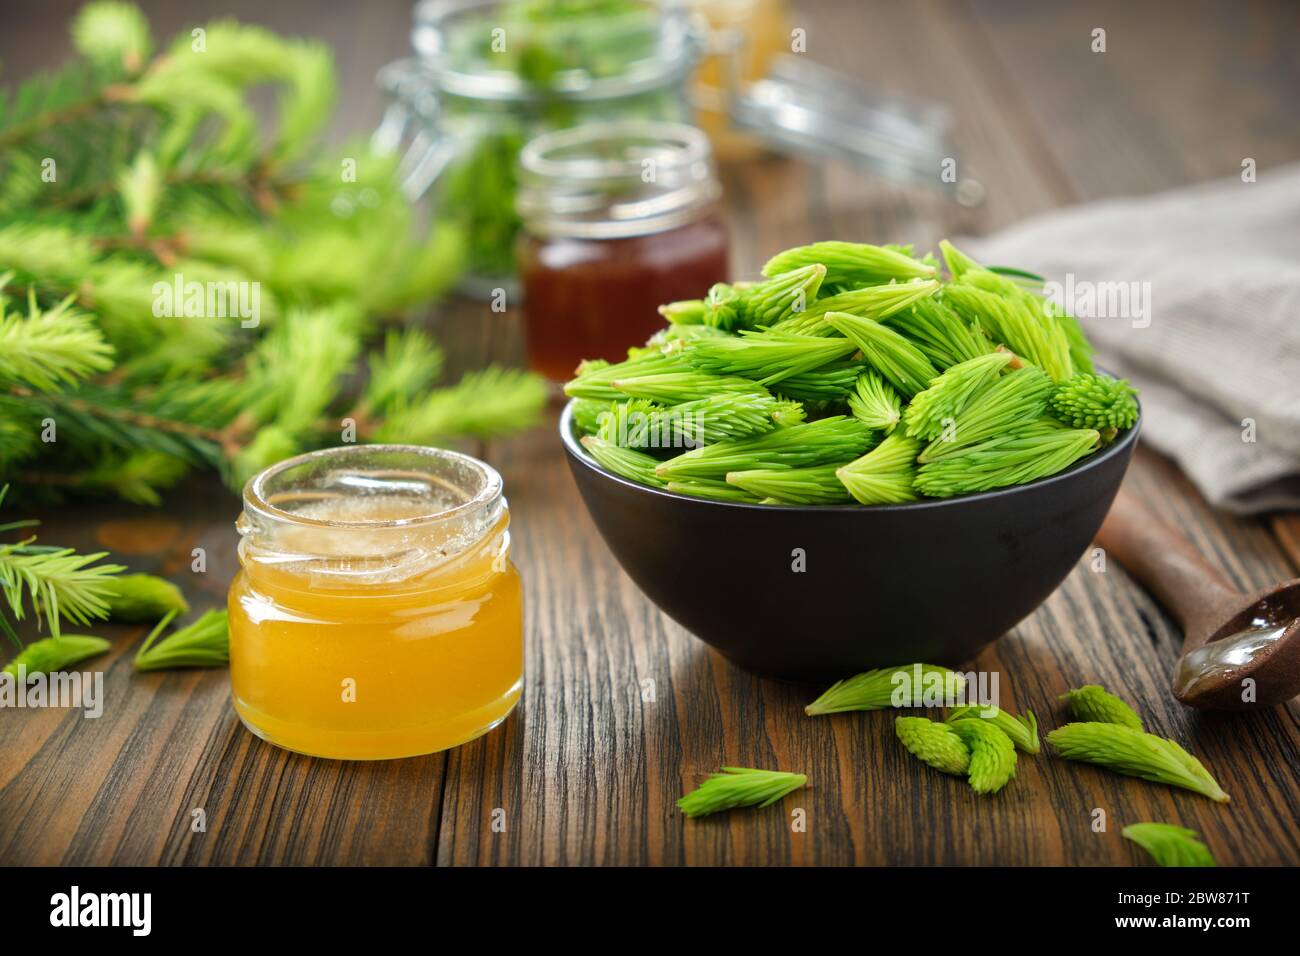 Jar of honey or syrup, spruce tips in a black bowl, twigs of fir tree on wooden table. Stock Photo